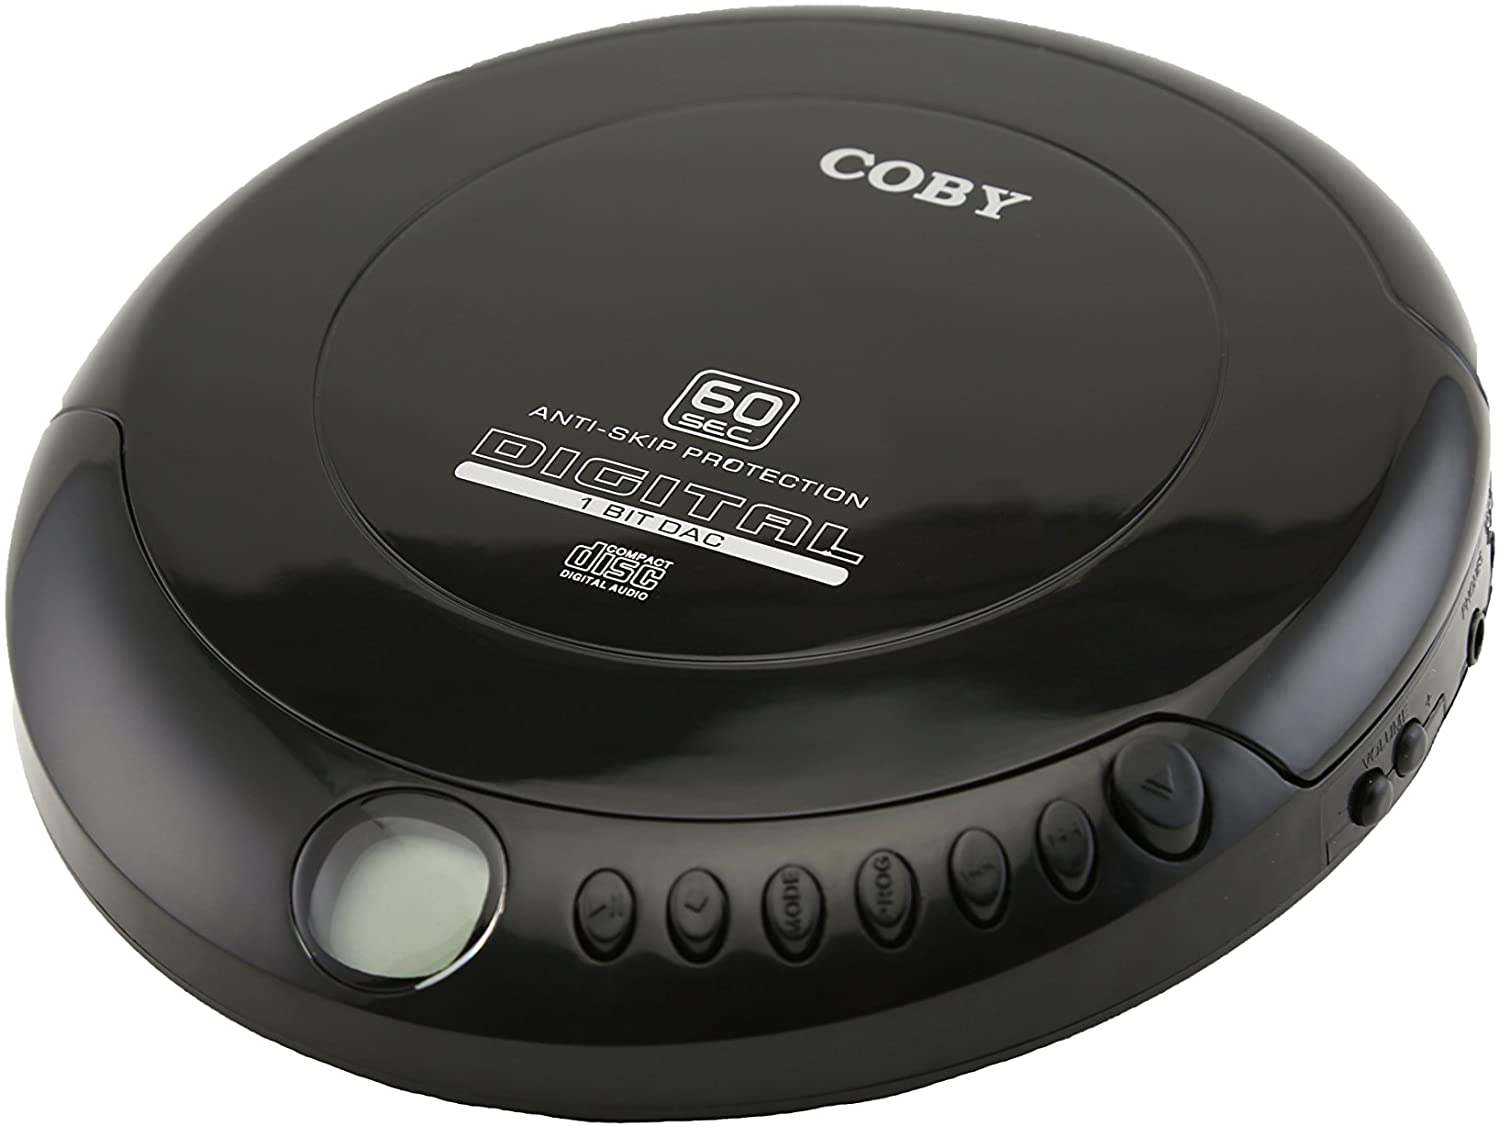 Coby - best kid cd player